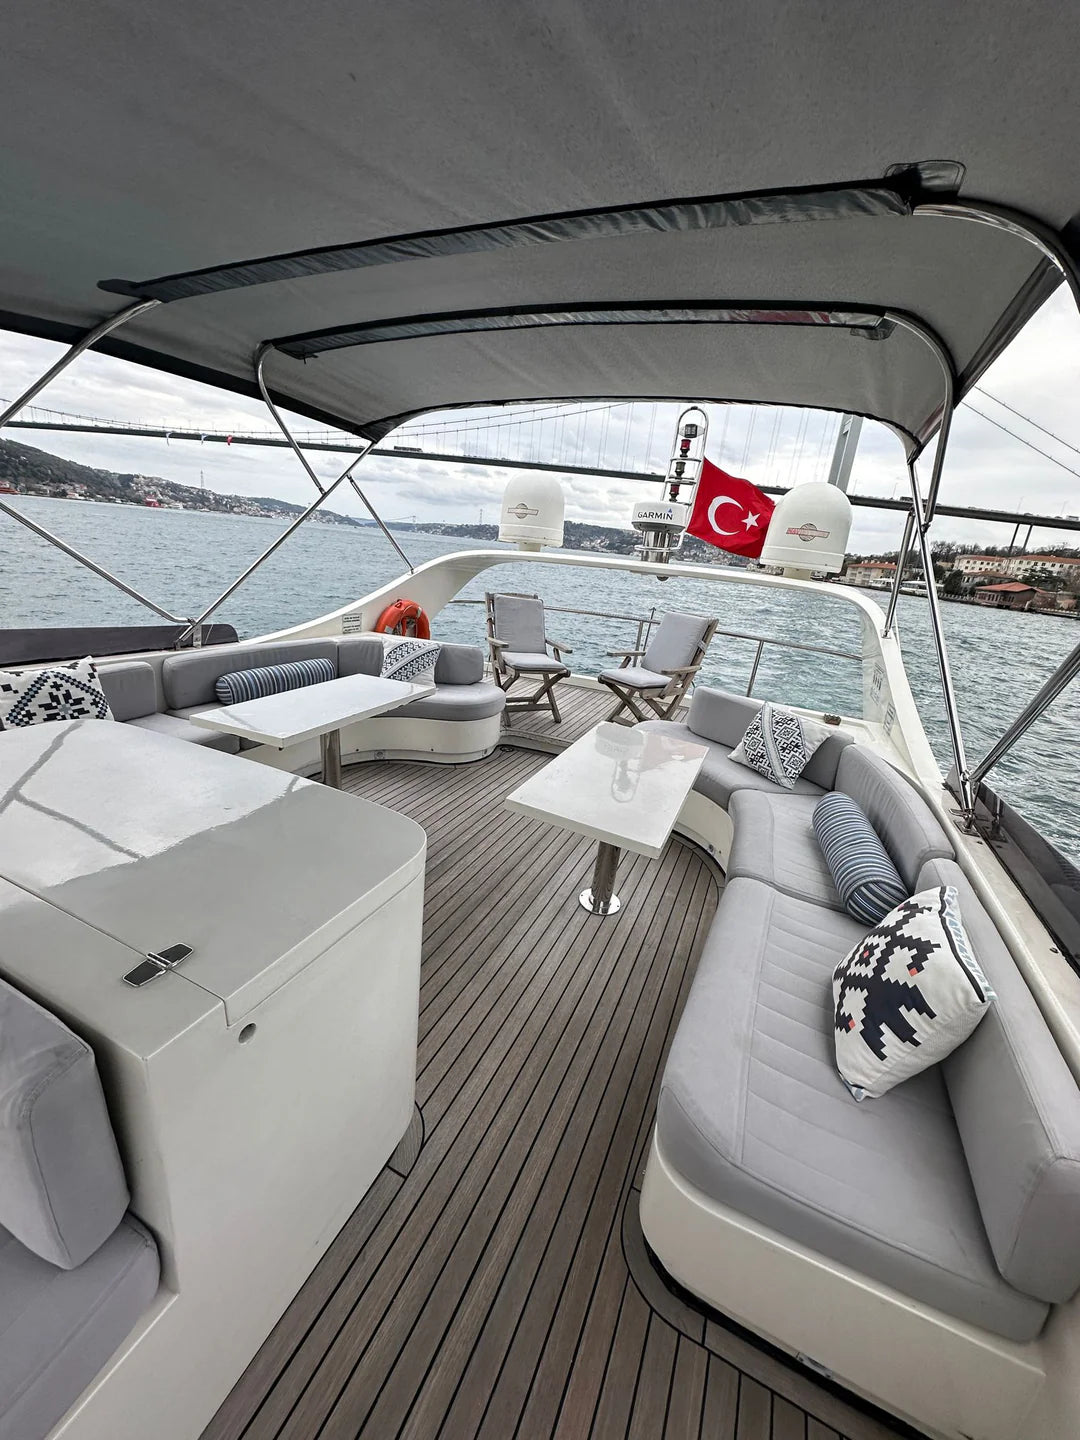 Couple celebrates engagement on private yacht in Bosphorus.